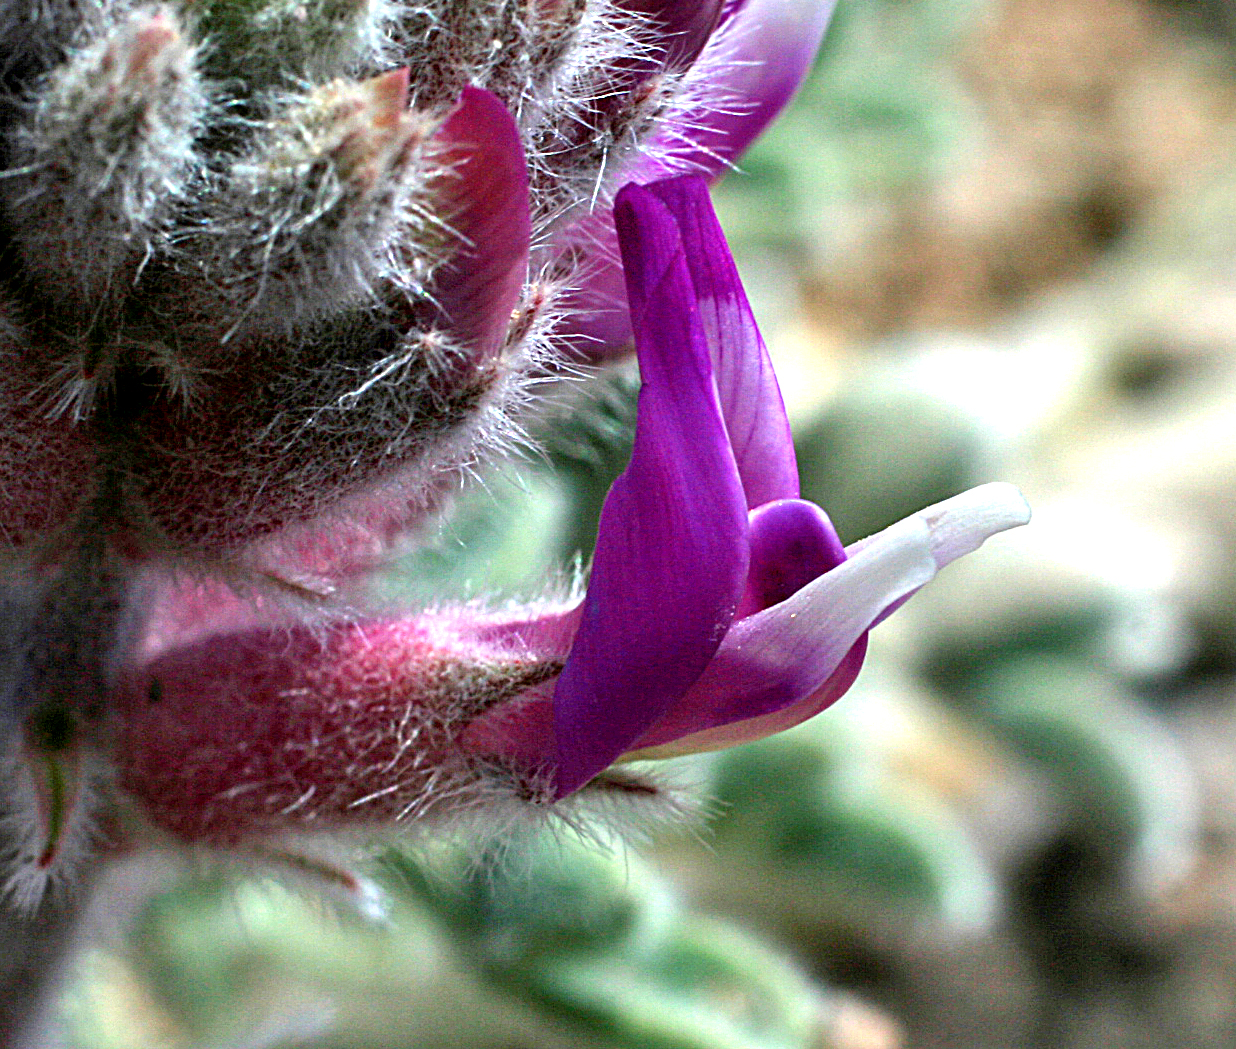 Characteristic pea-like flower, pink with a protruding white lip and fuzz on the sepals at the base of the flower